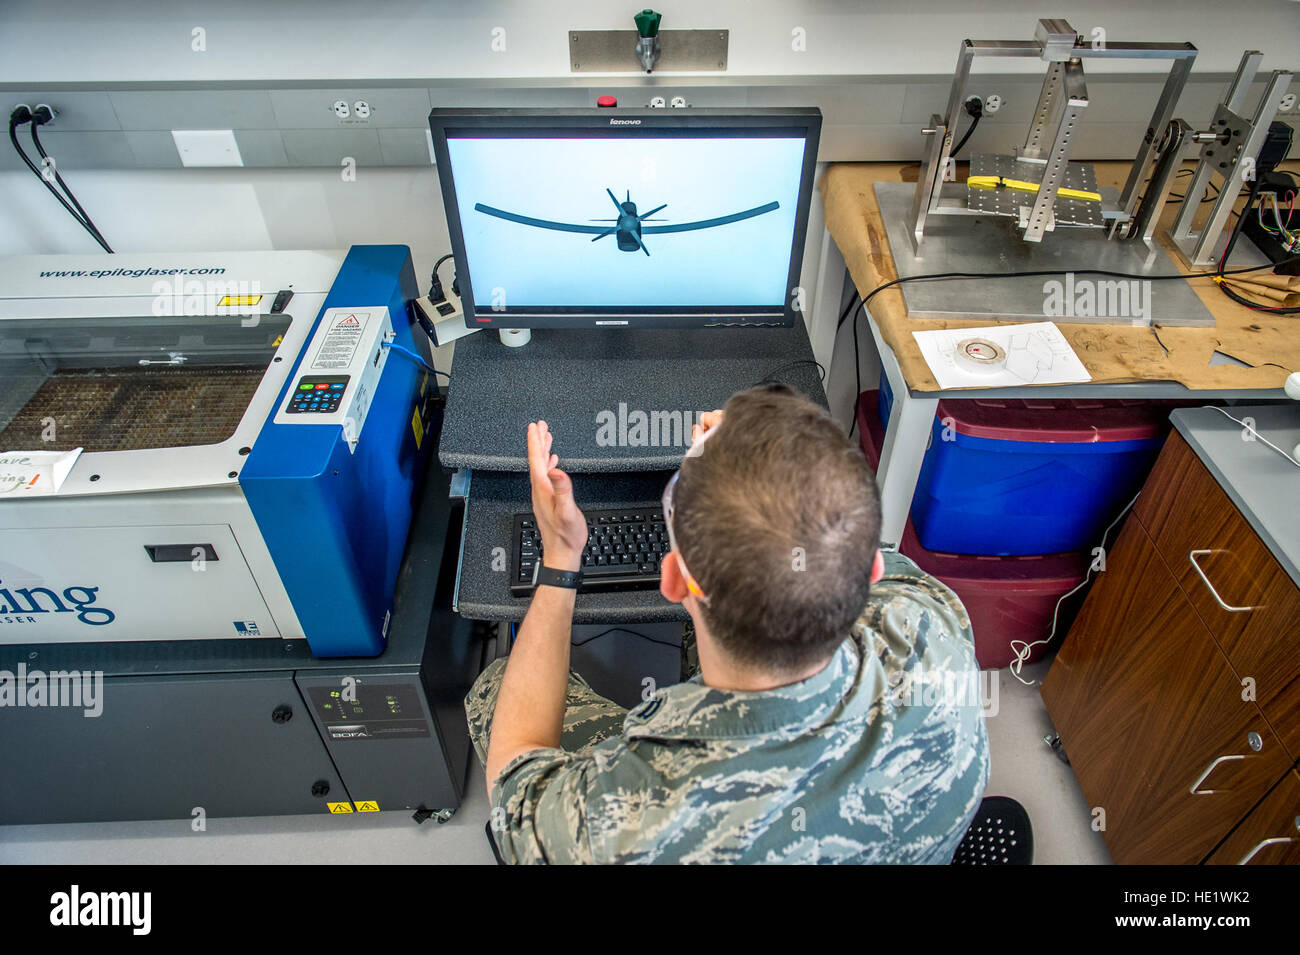 Capt. Kevin W. O'Brien is Operations Flight Commander of AFROTC Detachment 520 and a Ph.D. candidate in Engineering at Cornell University in Ithaca, NY, where he is doing research on using air pressure to morph the shape of aerodynamic wings, works on a computer animation showing the effect of his work in his lab, Apr. 15, 2016. O'Brien supervises the cadet wing at Cornell in the conduct of Leadership Laboratory LLAB activities, teaches Aerospace Studies and Leadership courses and manages programs to identify, attract, and retain cadets for the AFROTC program.   J.M. Eddins Jr. Stock Photo